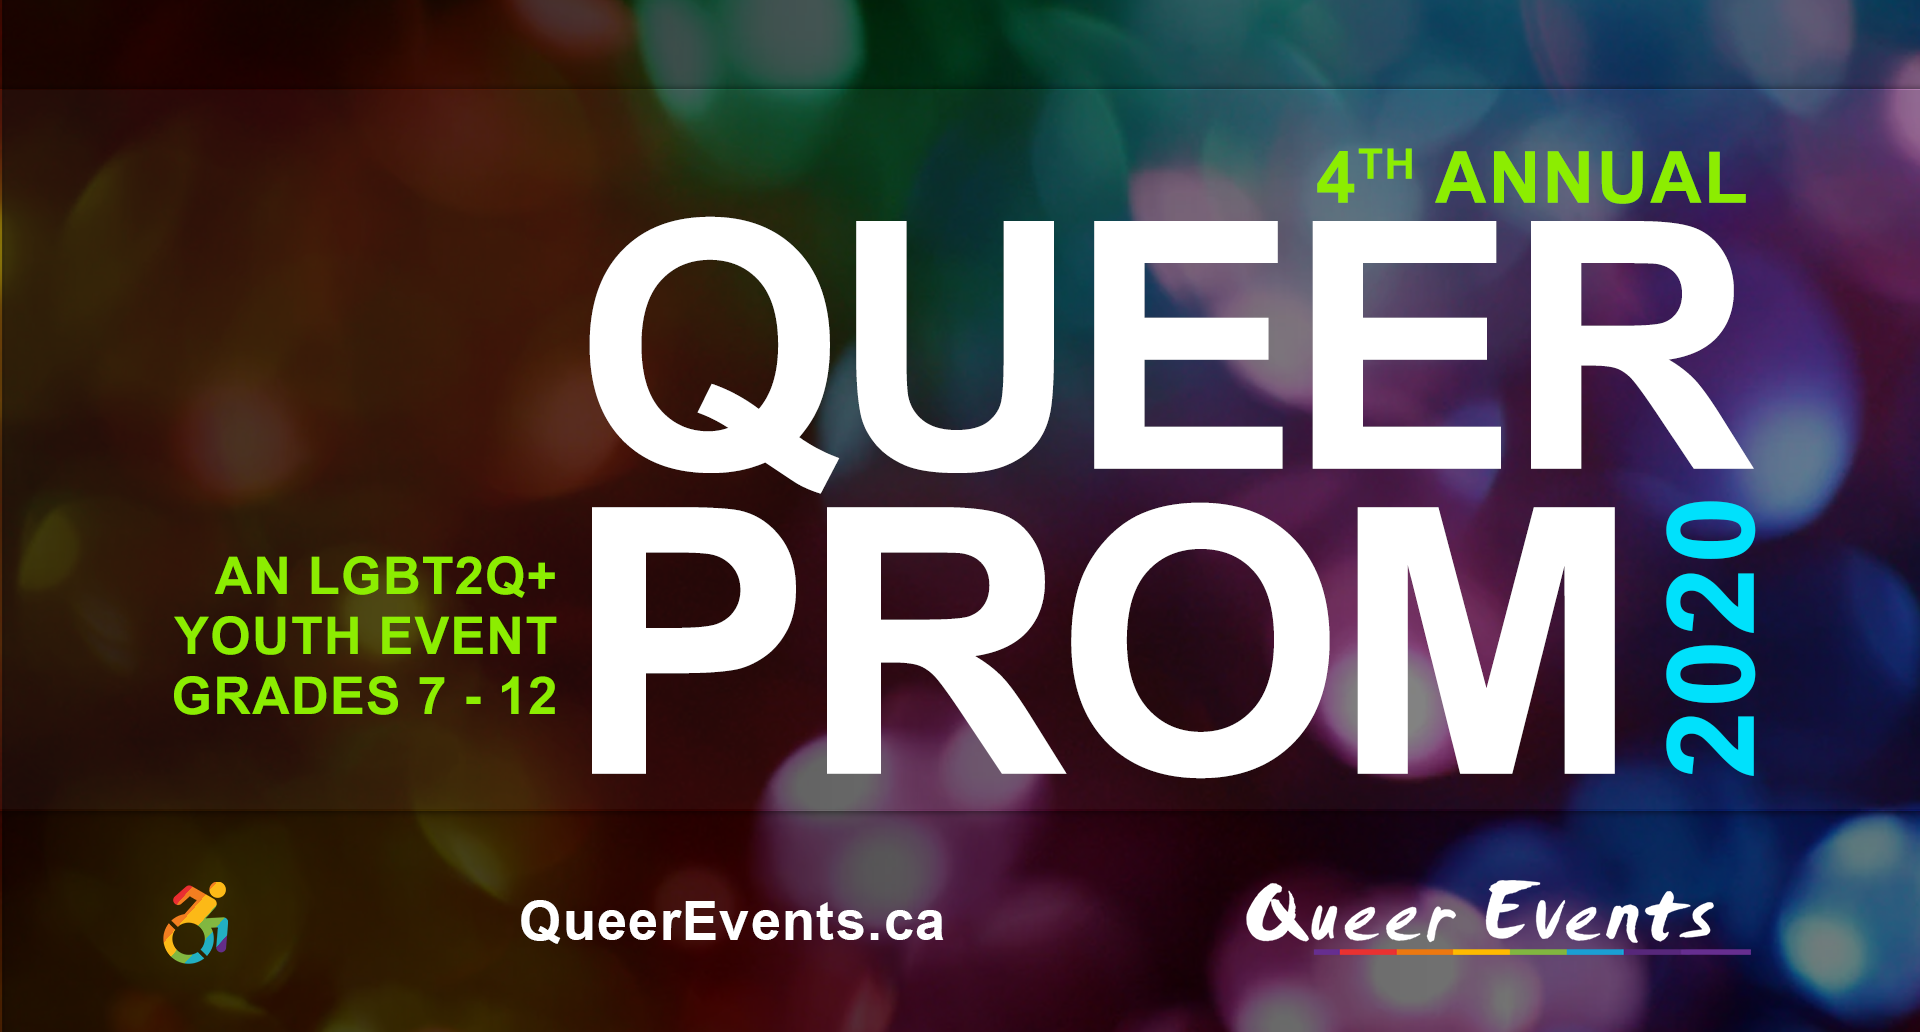 QueerEvents.ca - London Annual Queer Prom for Youth presented by Queer Events